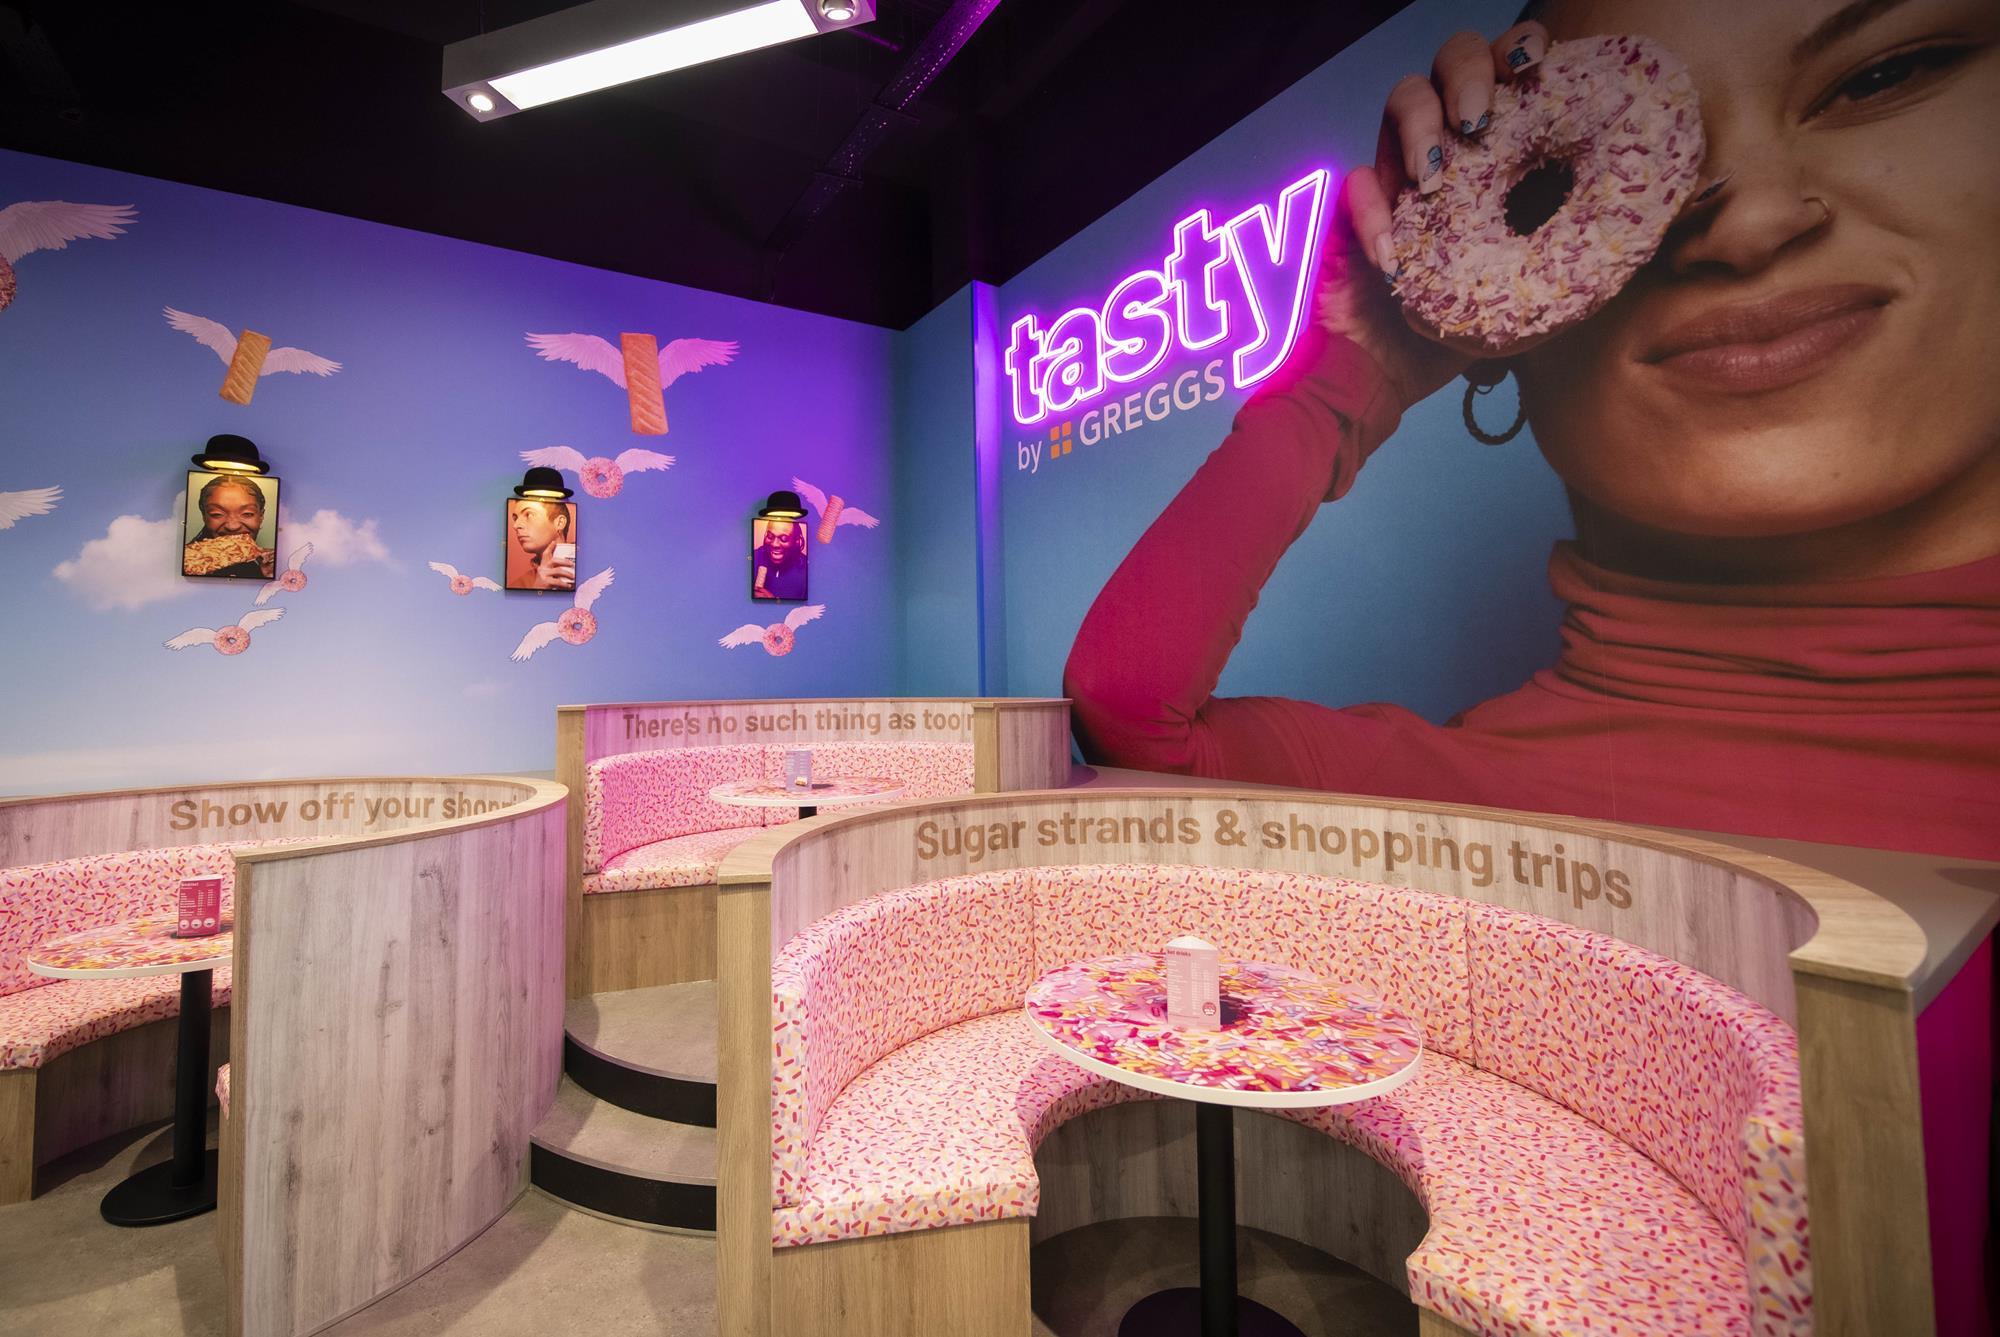 Greggs and Primark's 'tasty' fashion collaboration now on sale in